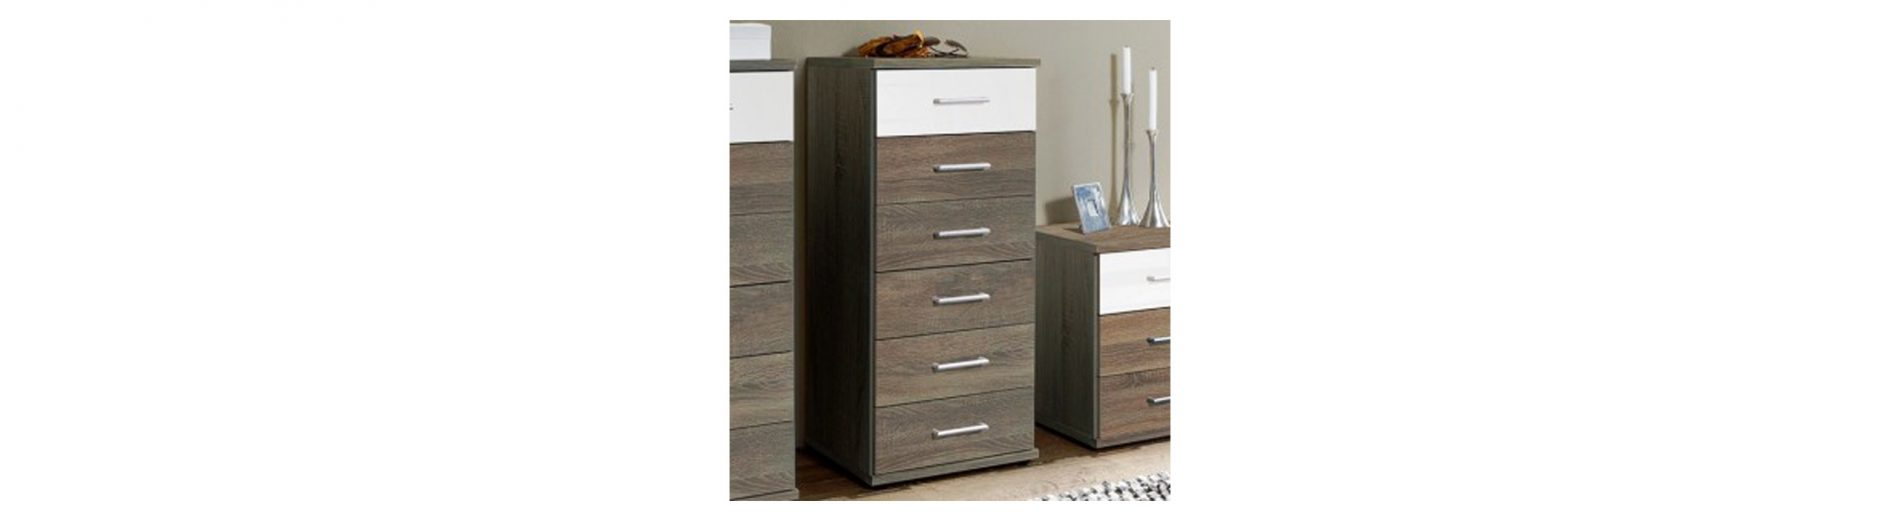 Chest of drawers are important pieces of furniture for Bedroom